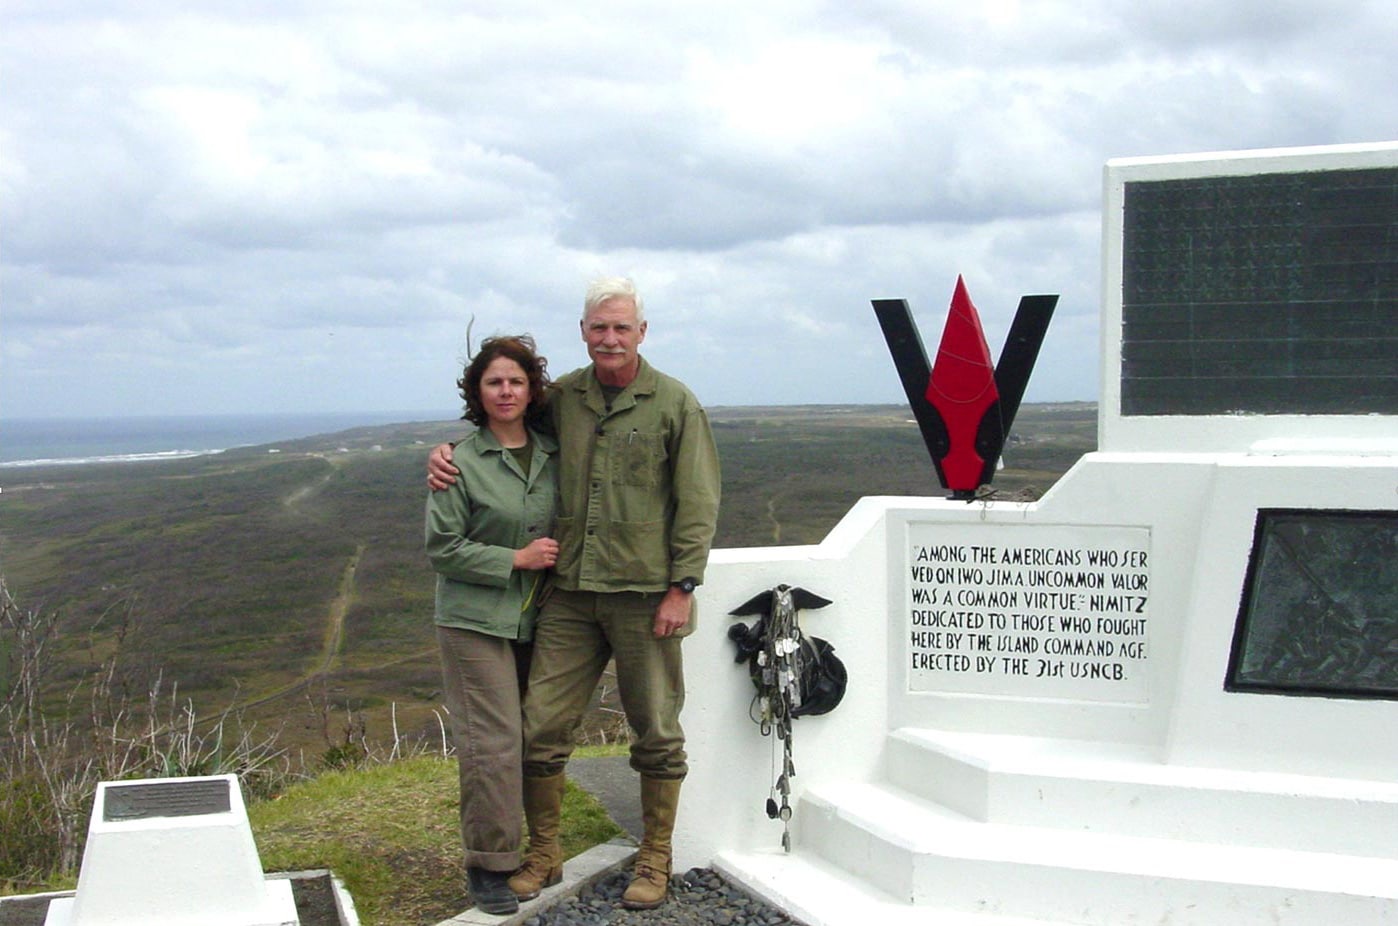 The author with his wife Julia Dye at the 5th Marine Division monument on Iwo Jima. Image: Dale A. Dye